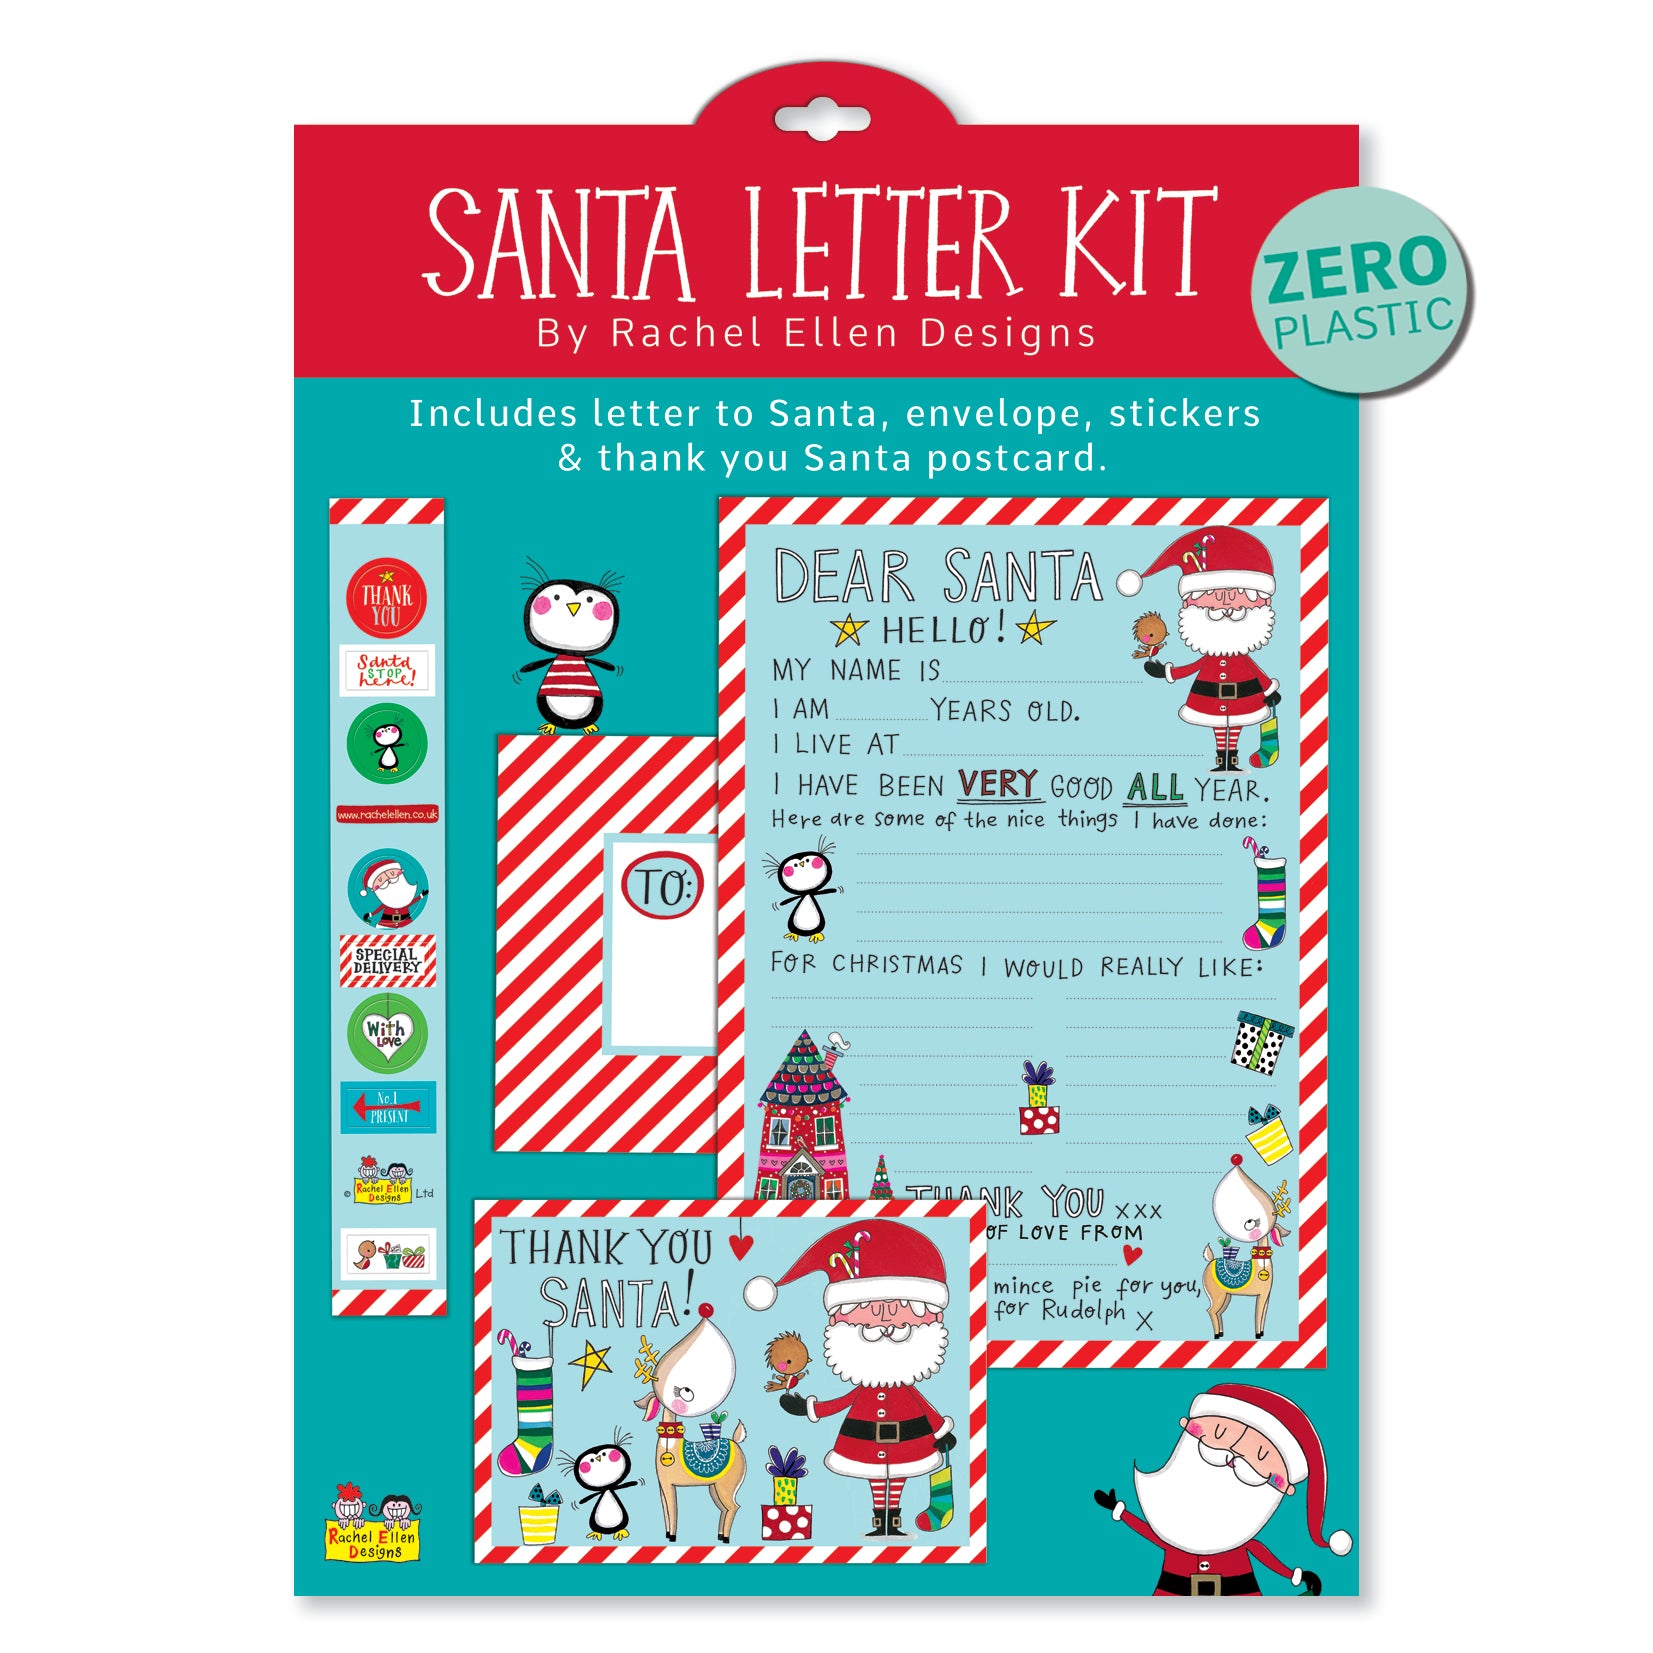 Santa Letter kit with red header and 'zero plastic' flash showing contents of letter, envelope, postcard and stickers, all in a children's design